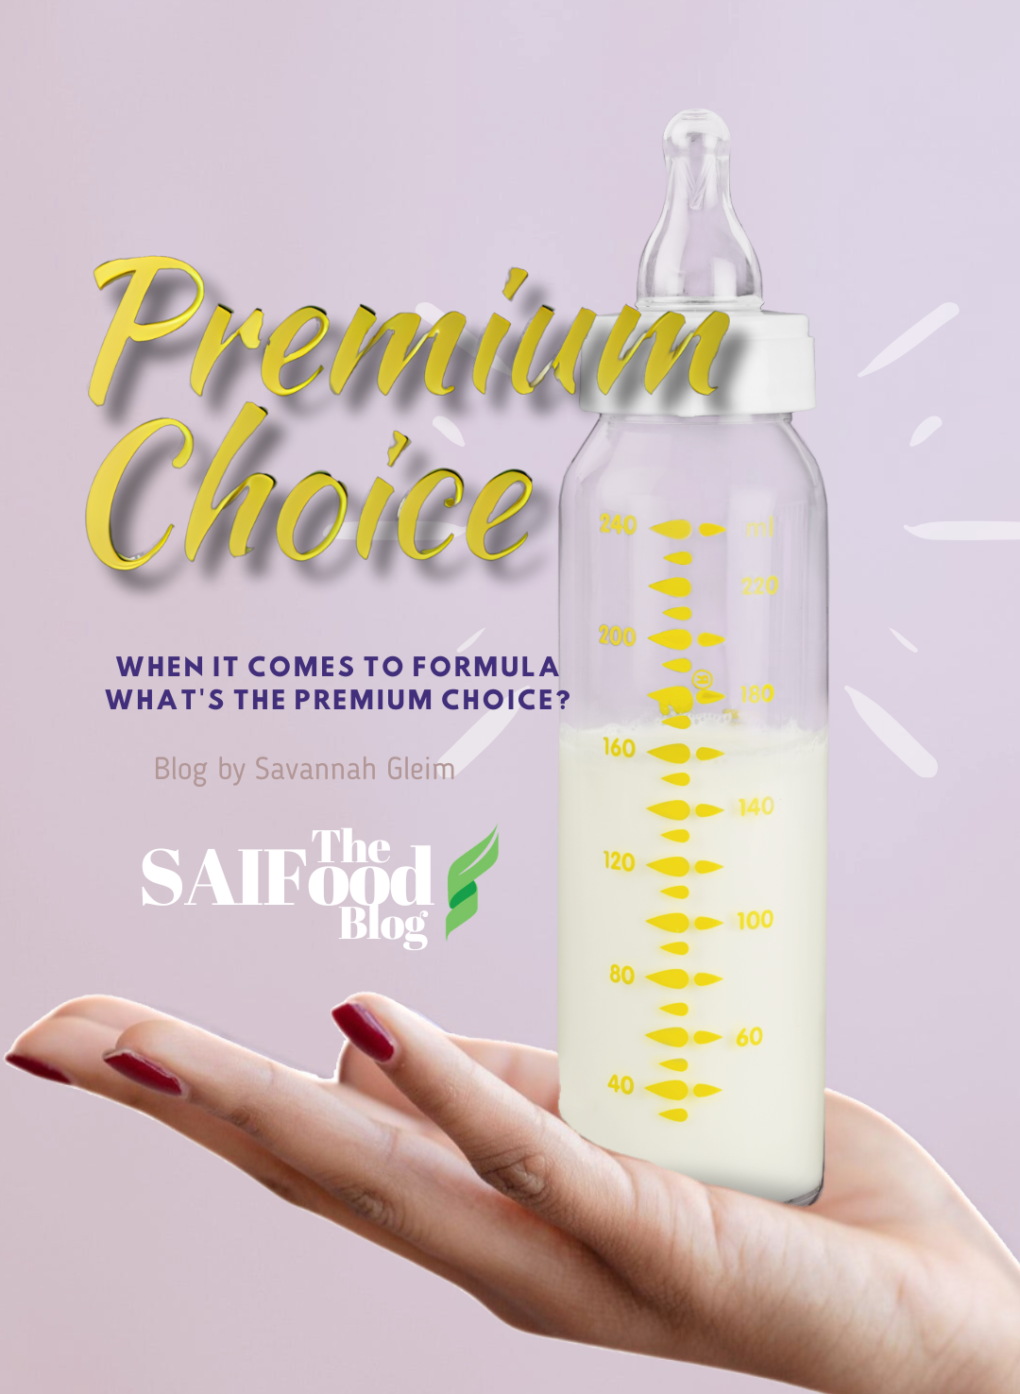 Hand holding bottle with Gold font "Premium Choice"